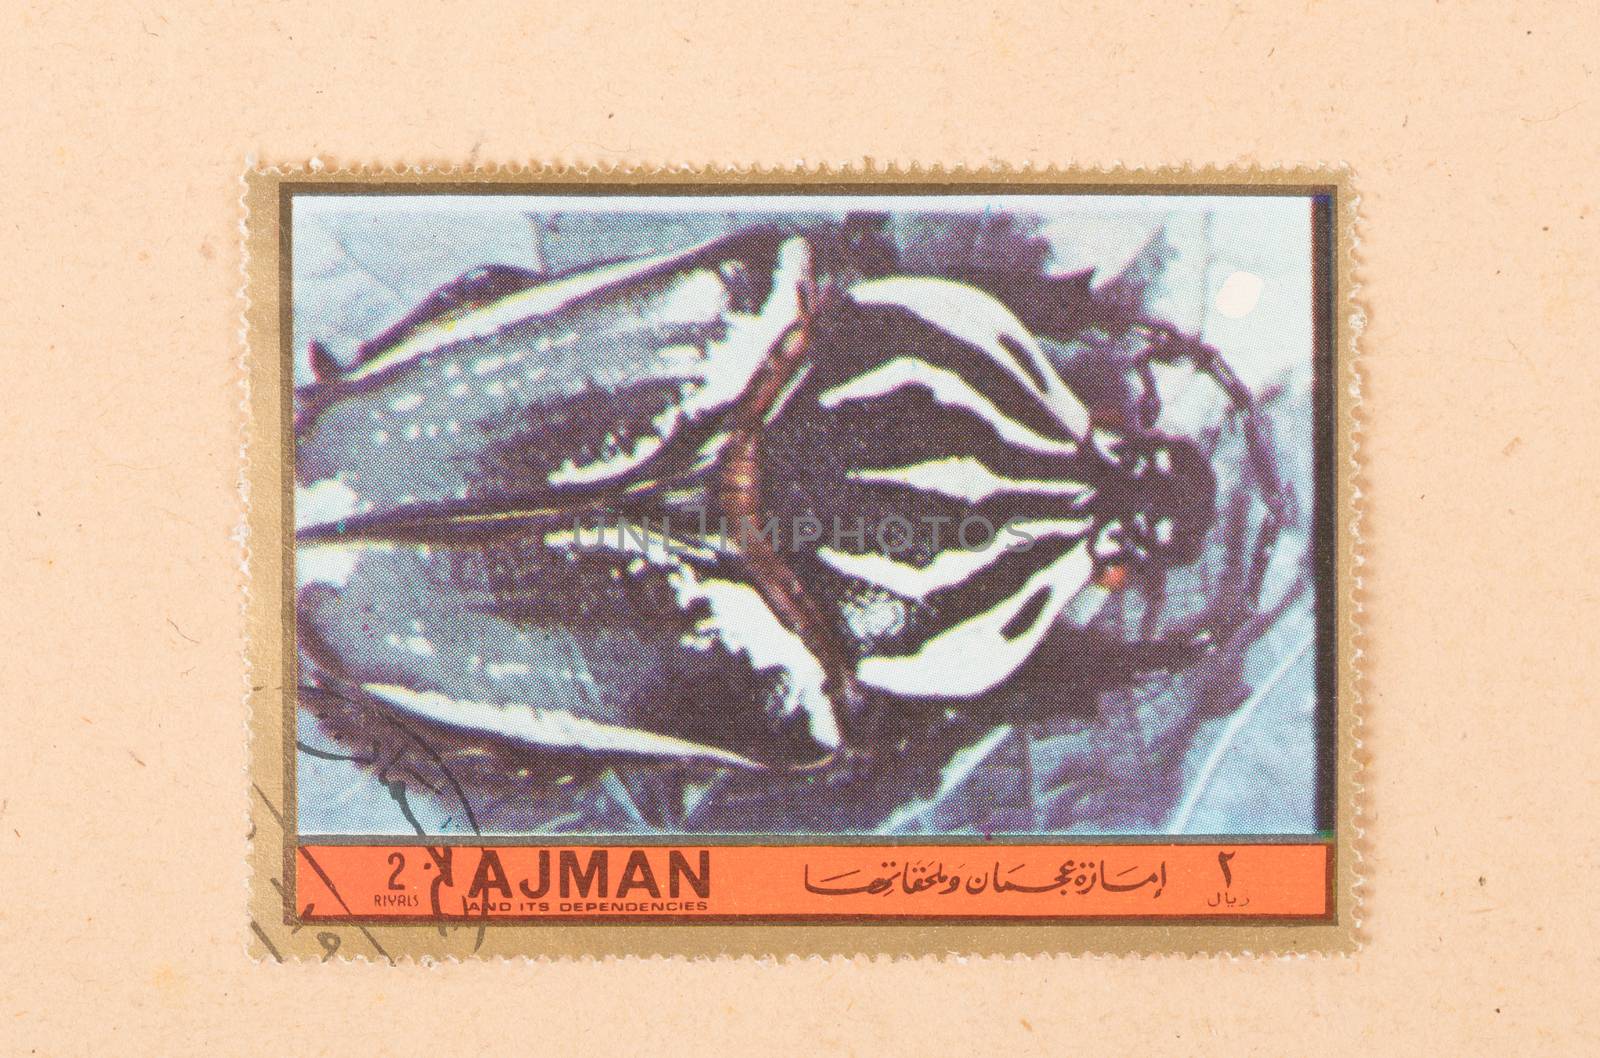 UNITED ARAB EMIRATES - CIRCA 1972: A stamp printed in the United by michaklootwijk